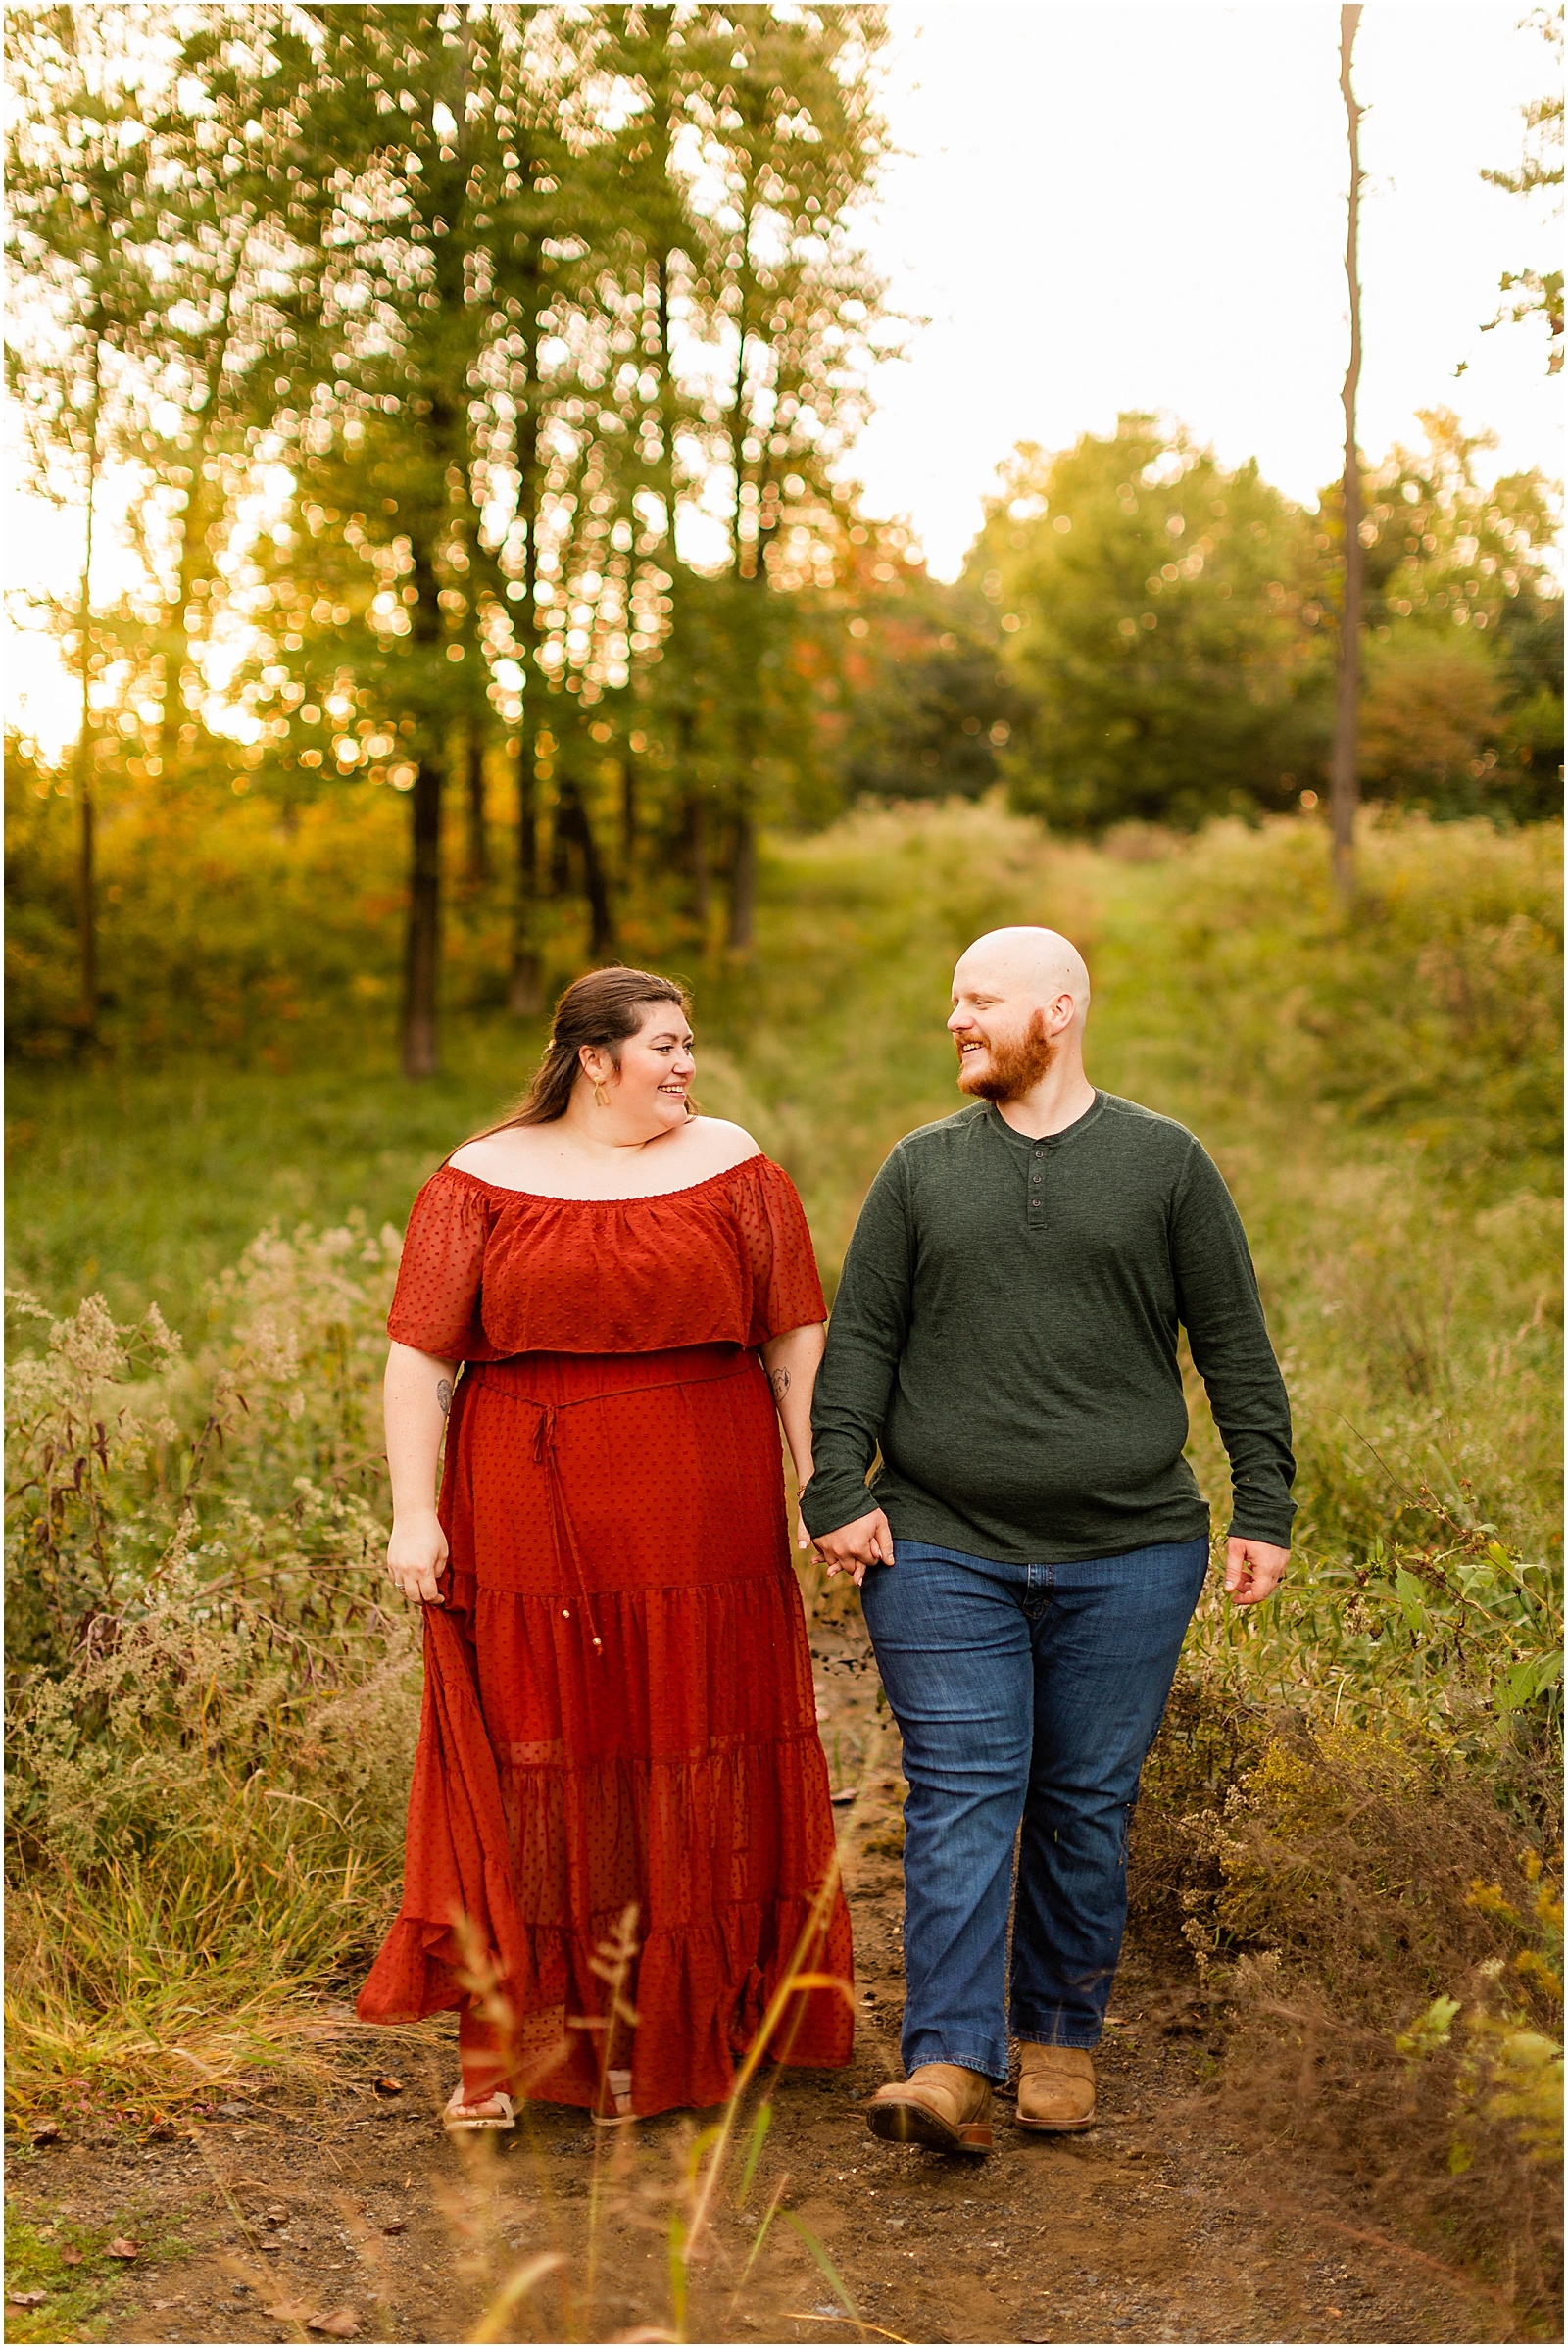 The Peck's Fall Family Session Bret and Brandie Photography | Evansville Indiana Wedding Photographers_0052.jpg